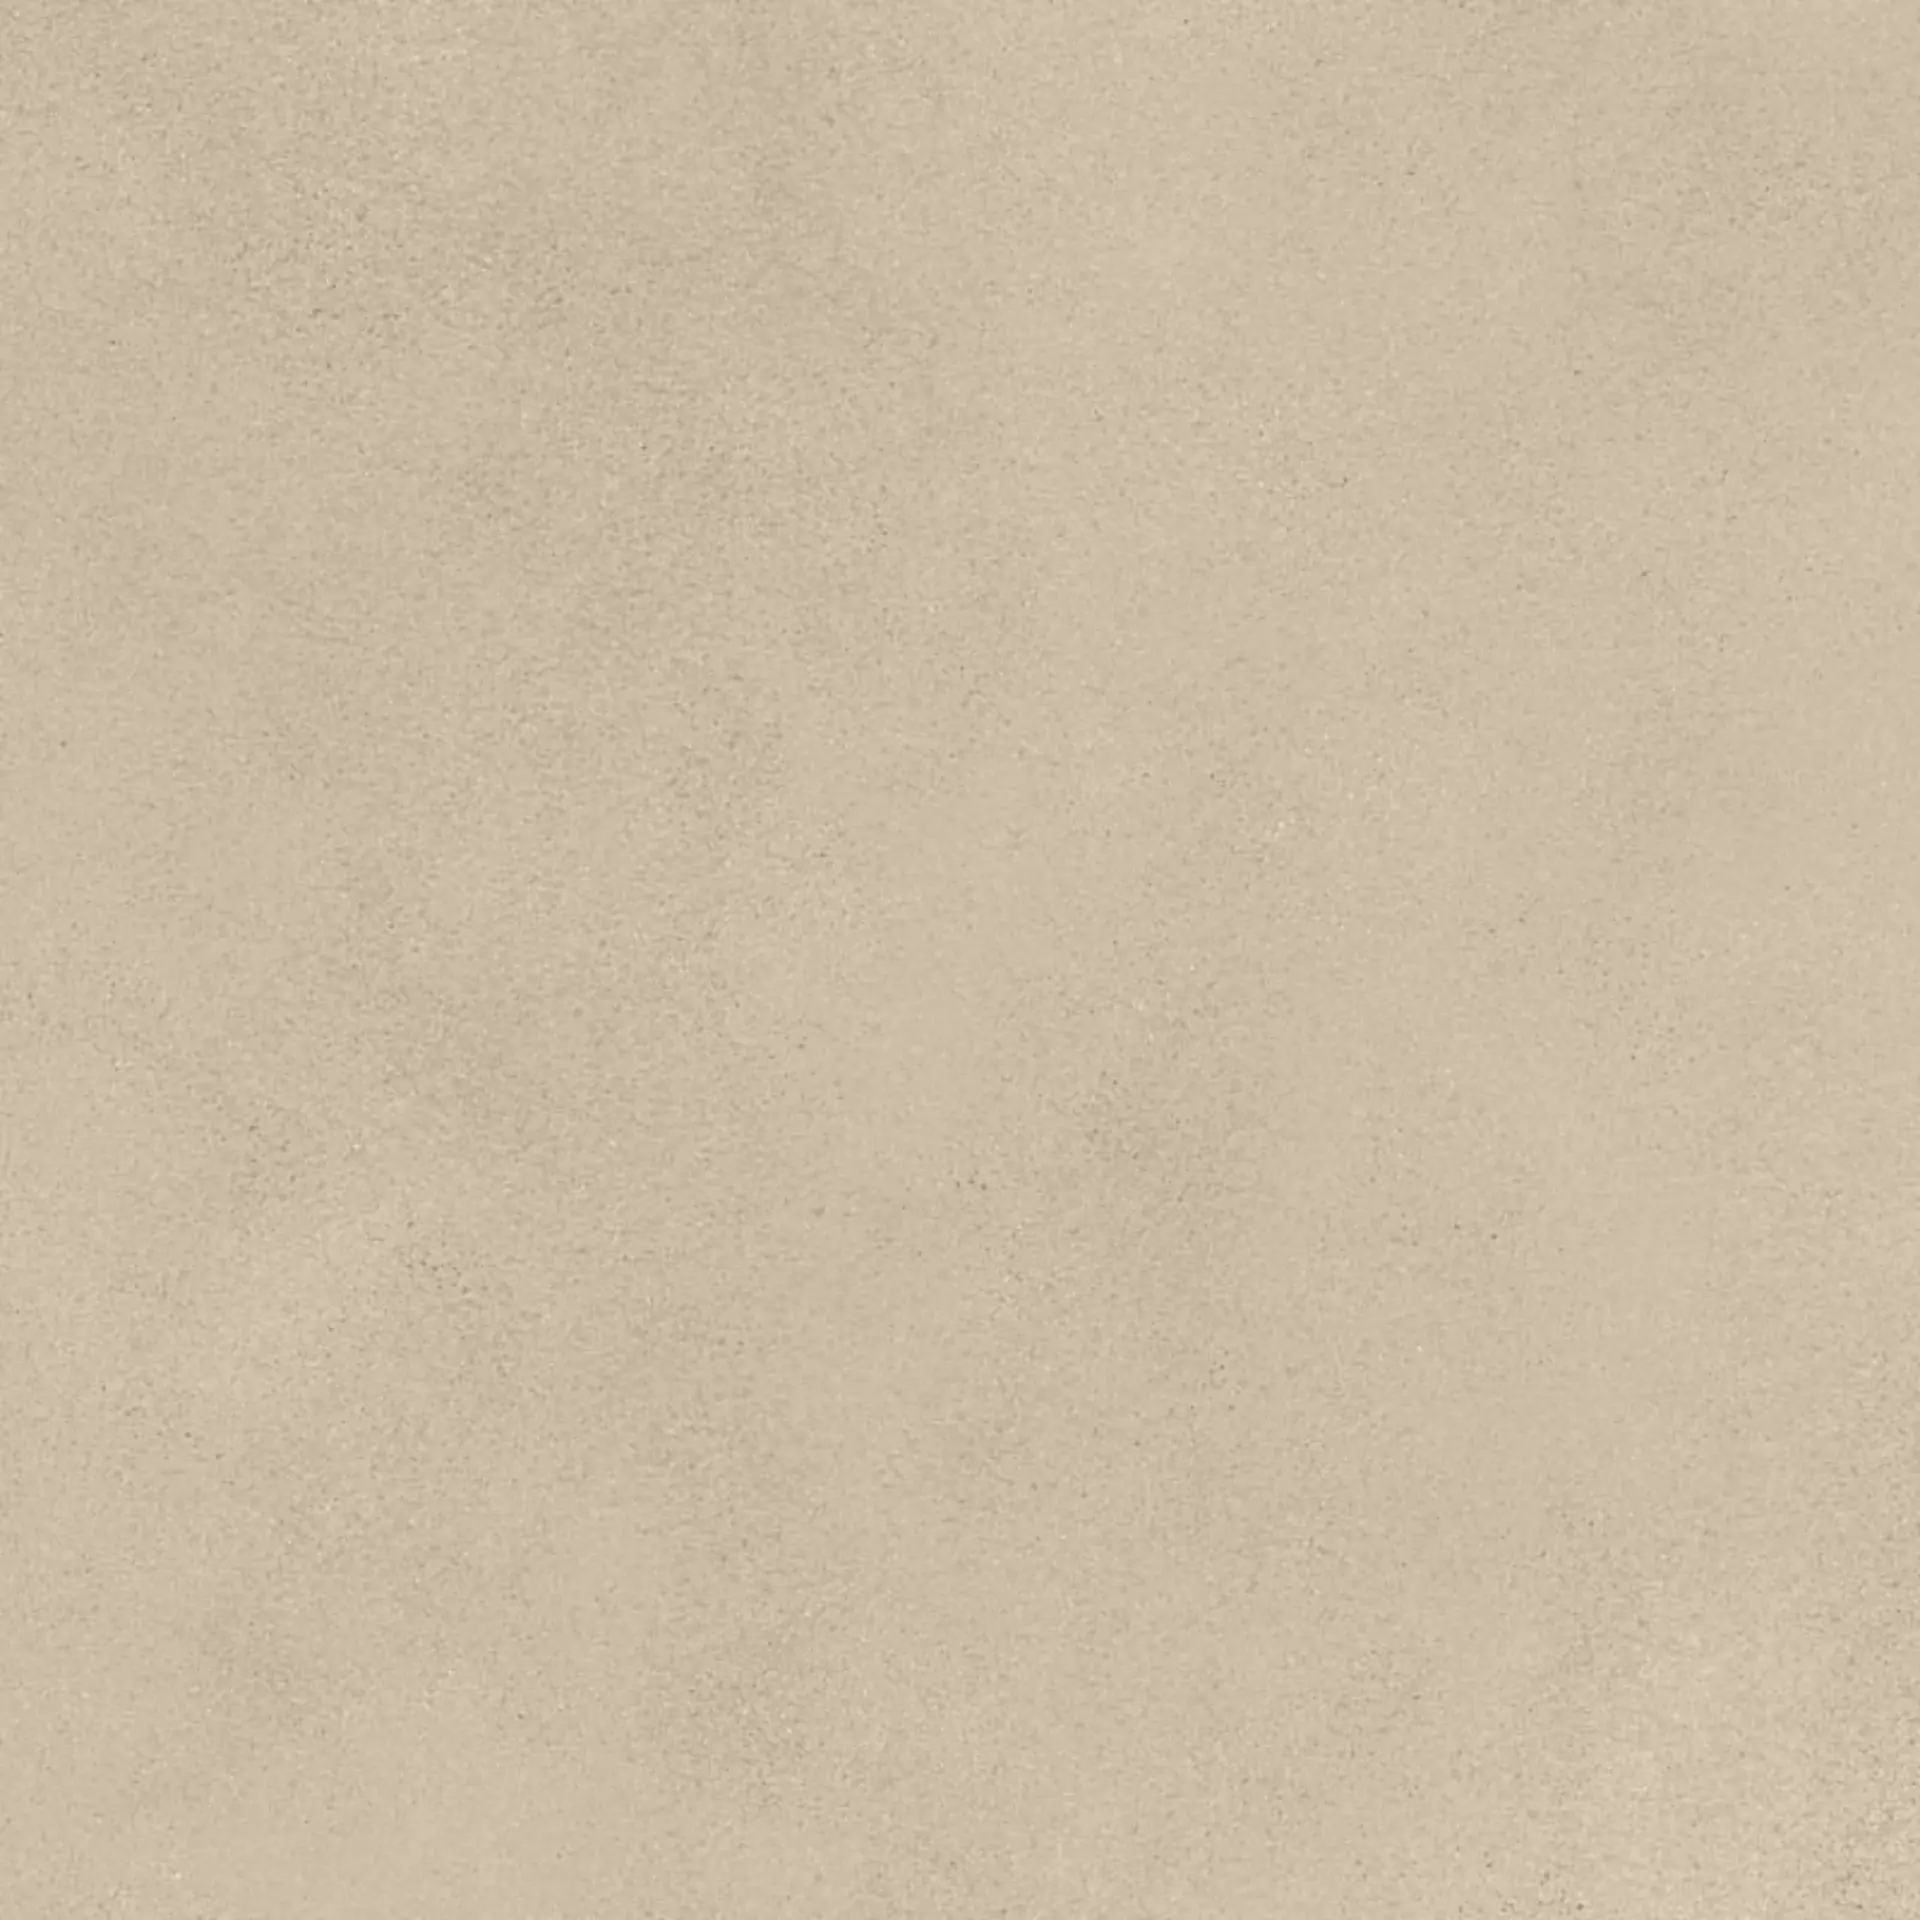 Sant Agostino Sable Beige Natural CSASABBE60 60x60cm rectified 10mm